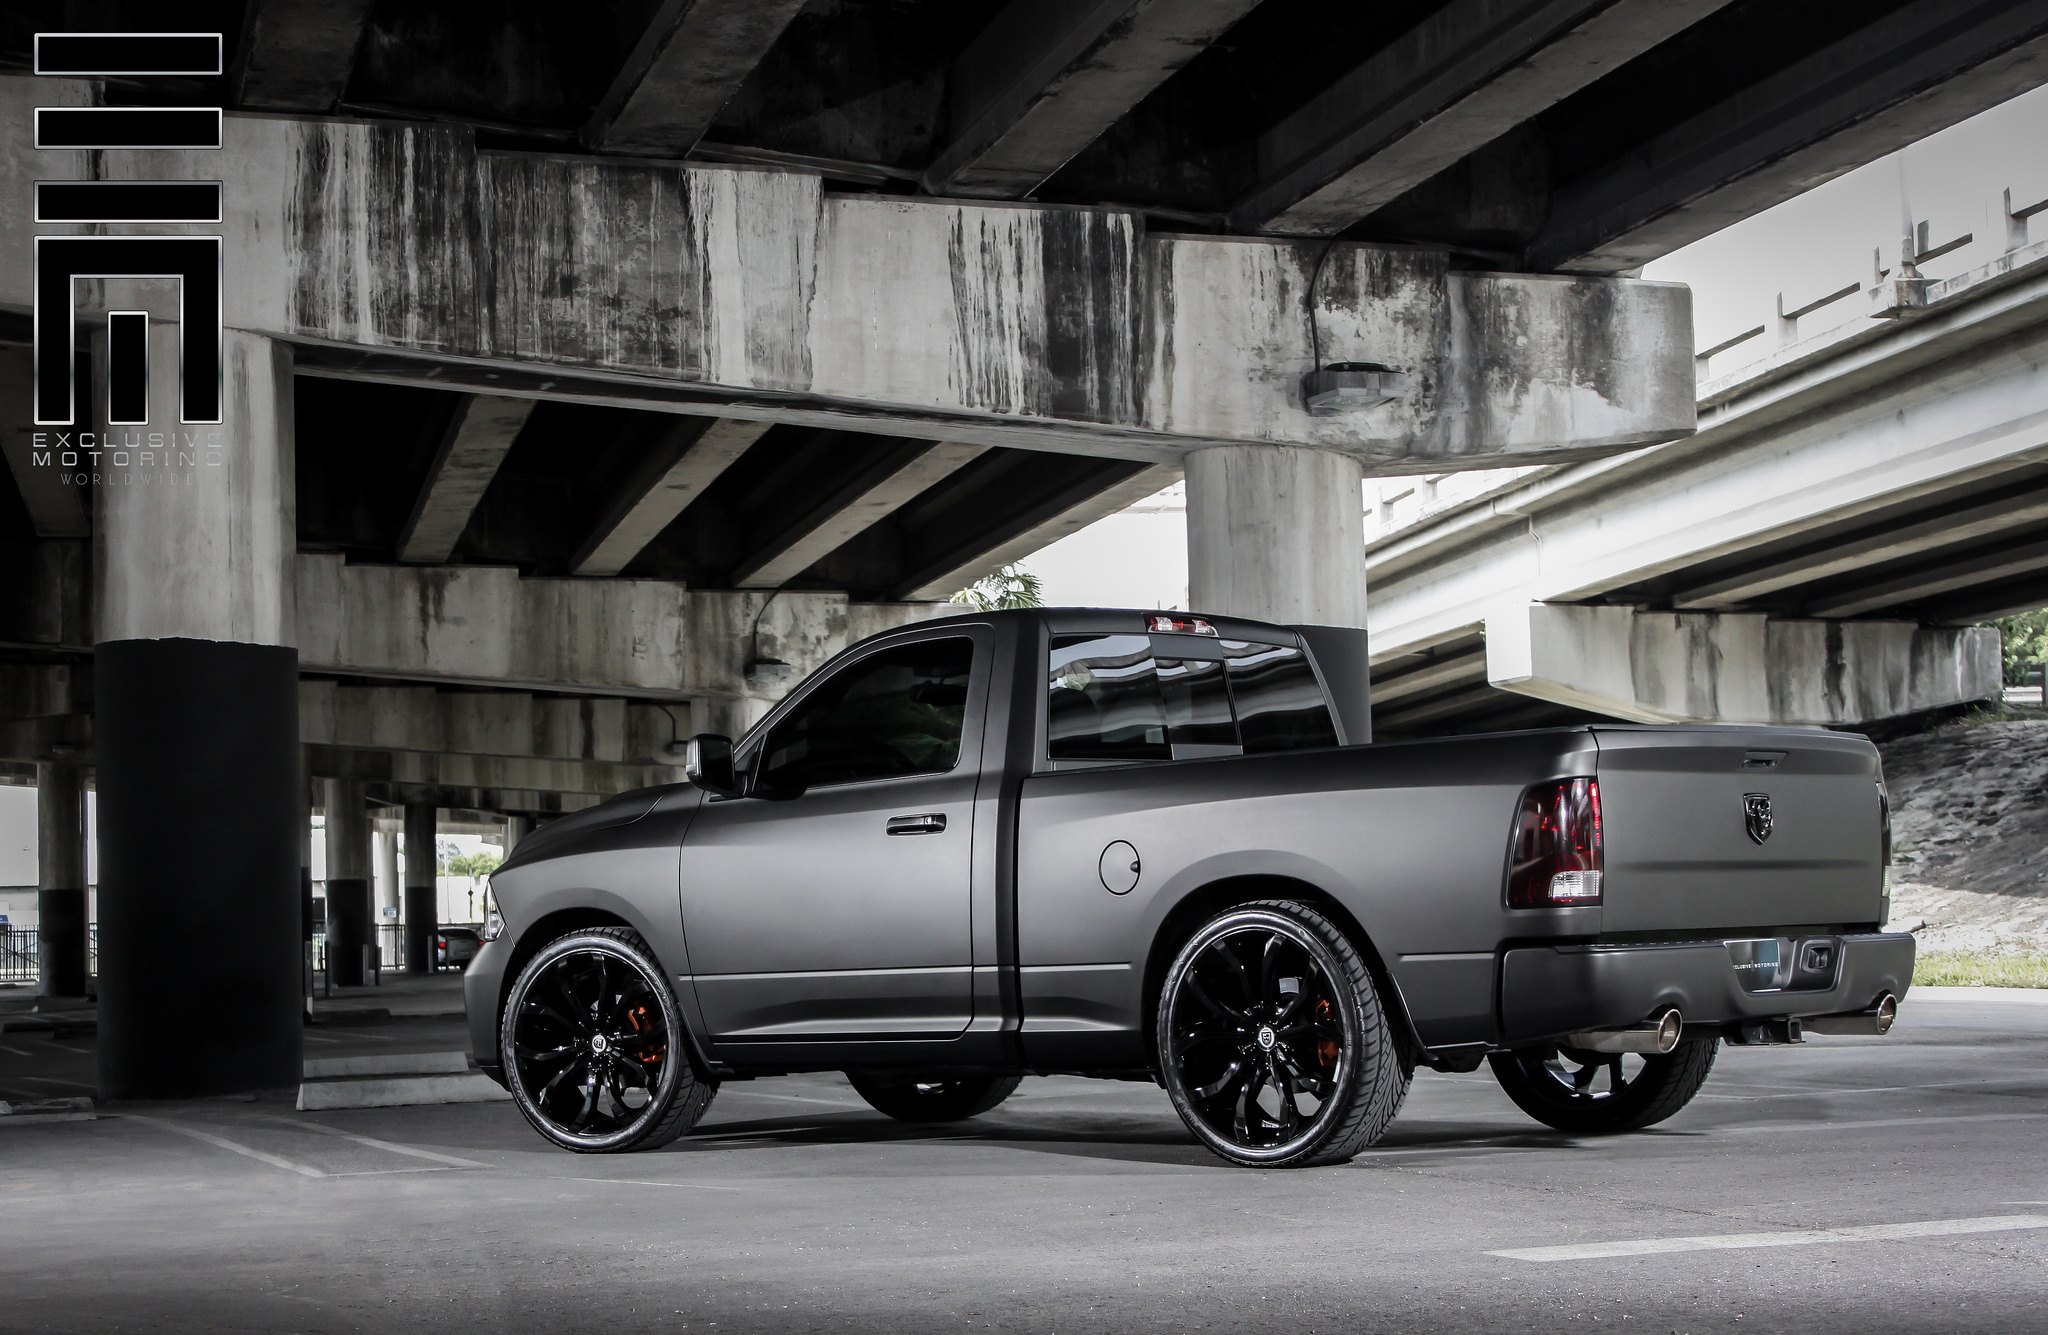 Dodge Ram Muscle Truck - Photo by Exclusive Motoring